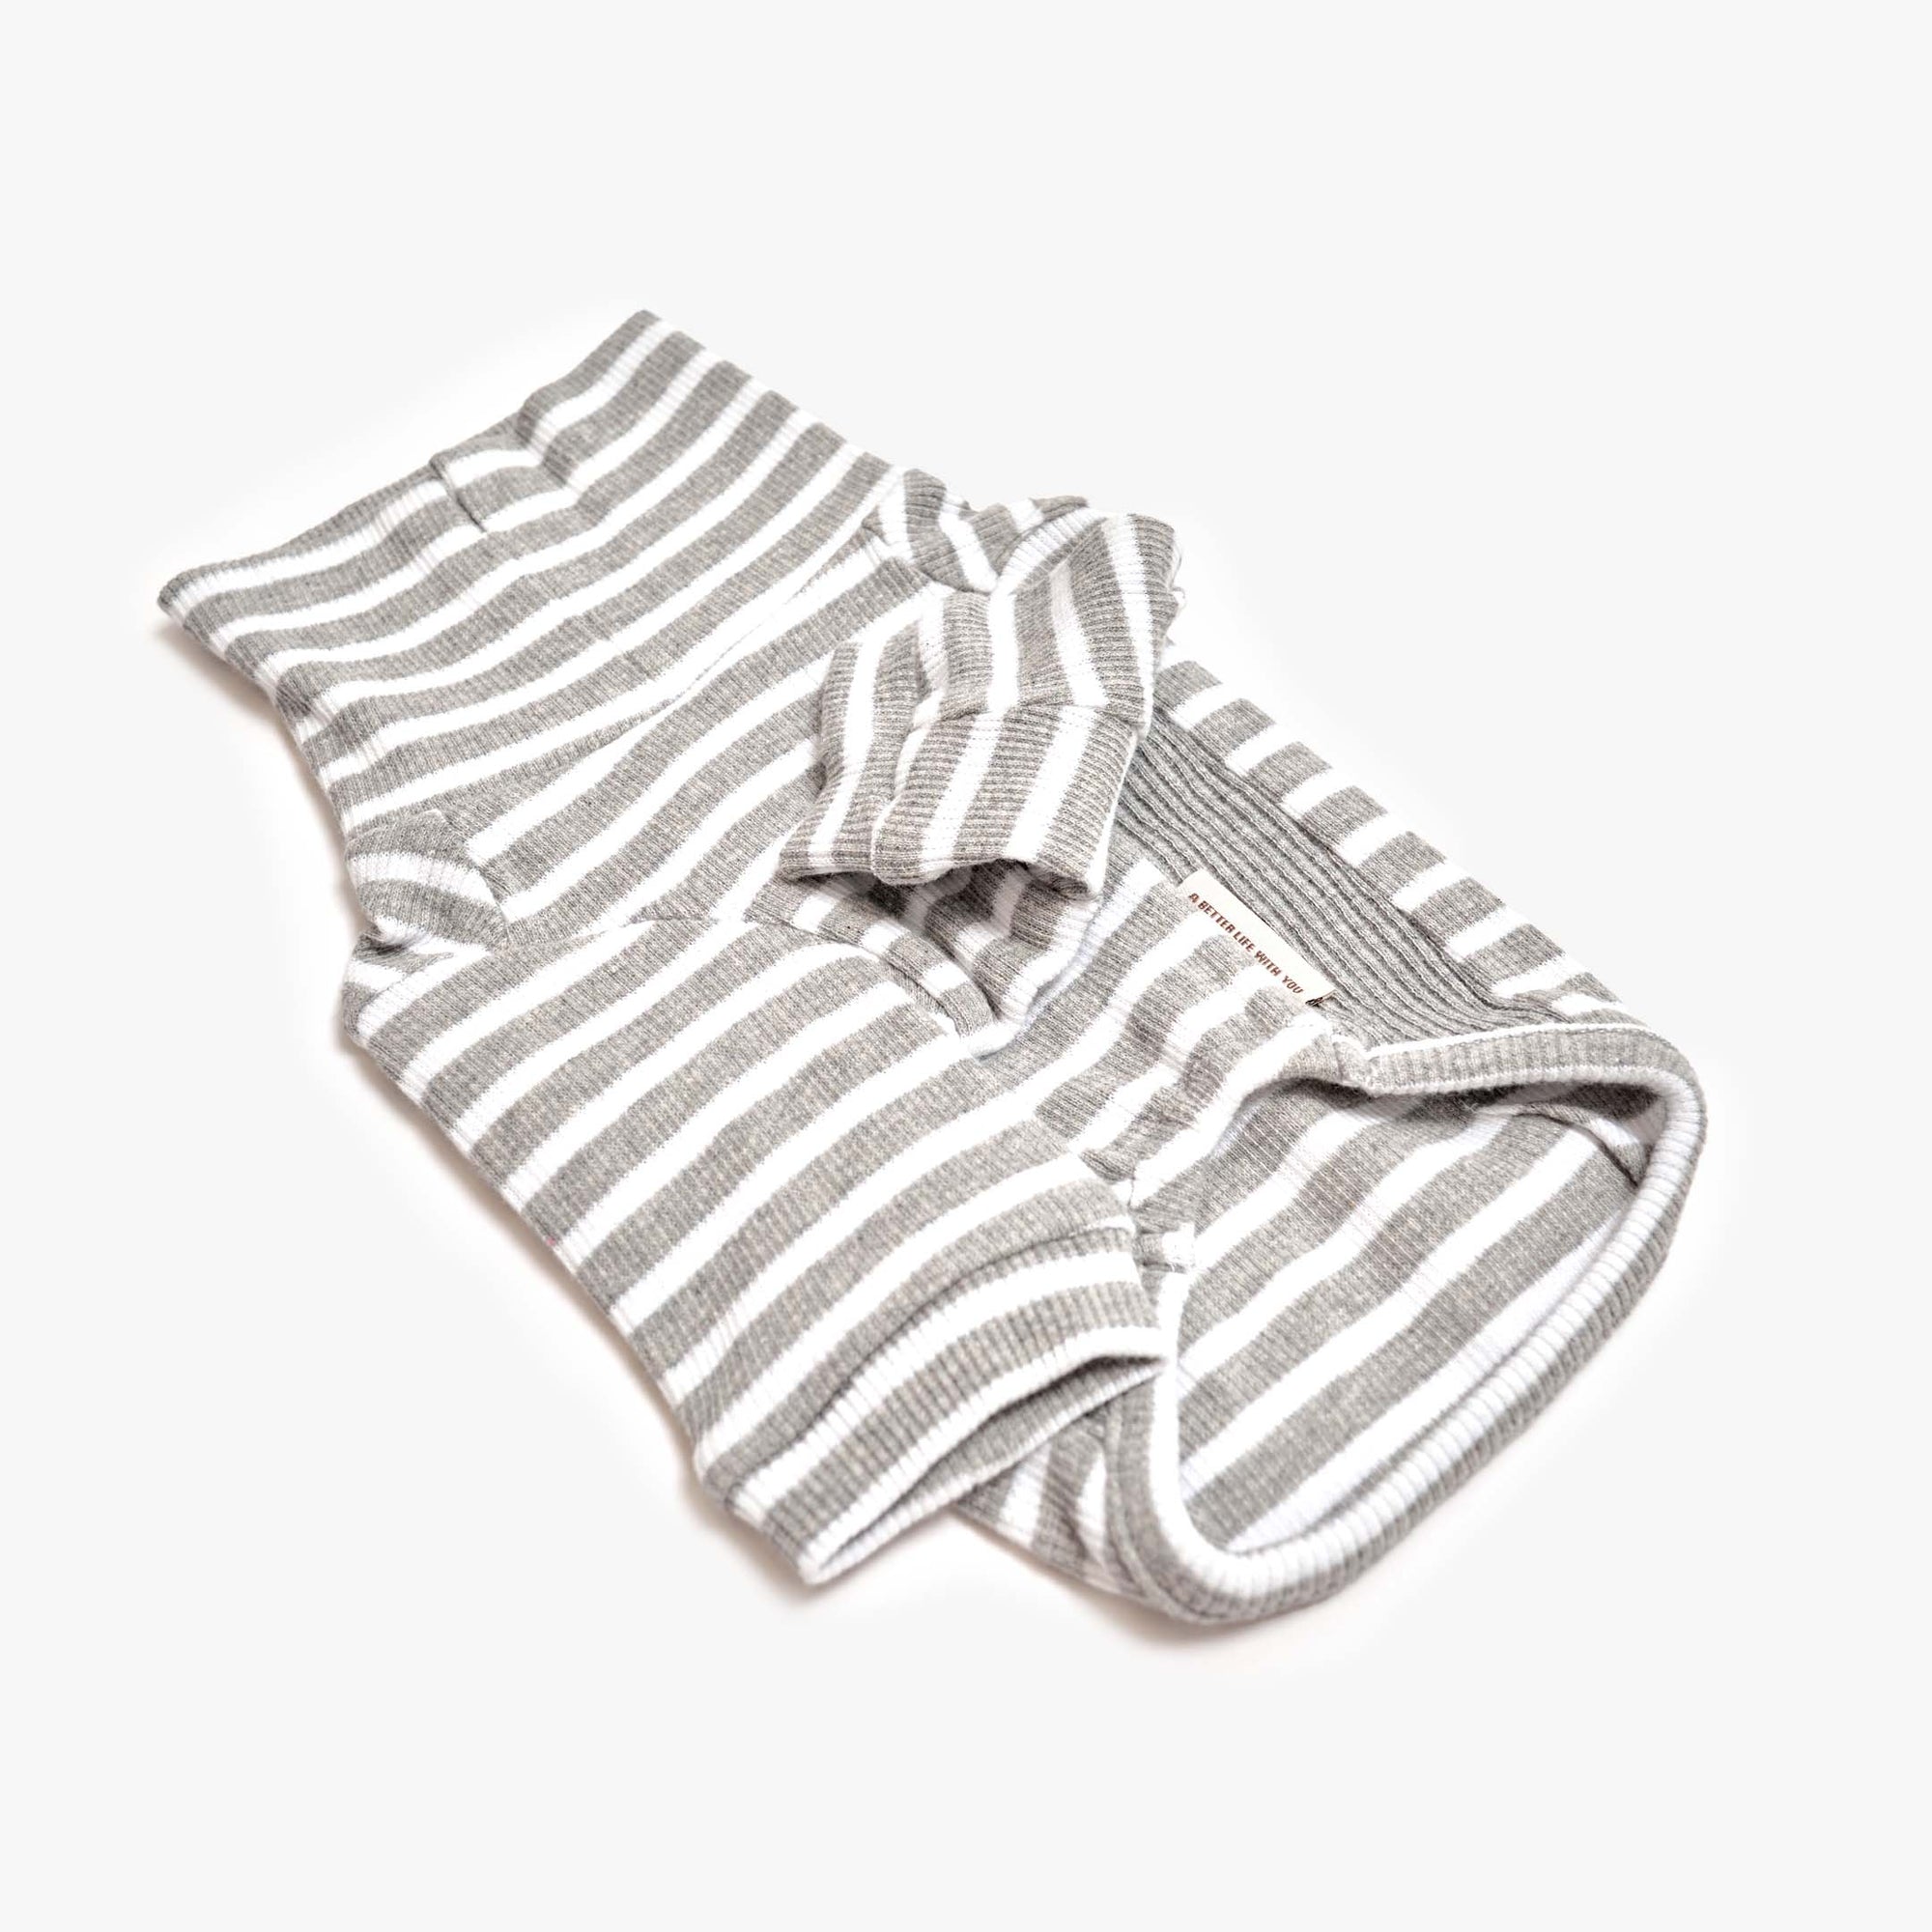 Stylish Heather Gray & Ivory  striped turtleneck dog shirt, complete with ribbed details and a cozy fit for your pet.